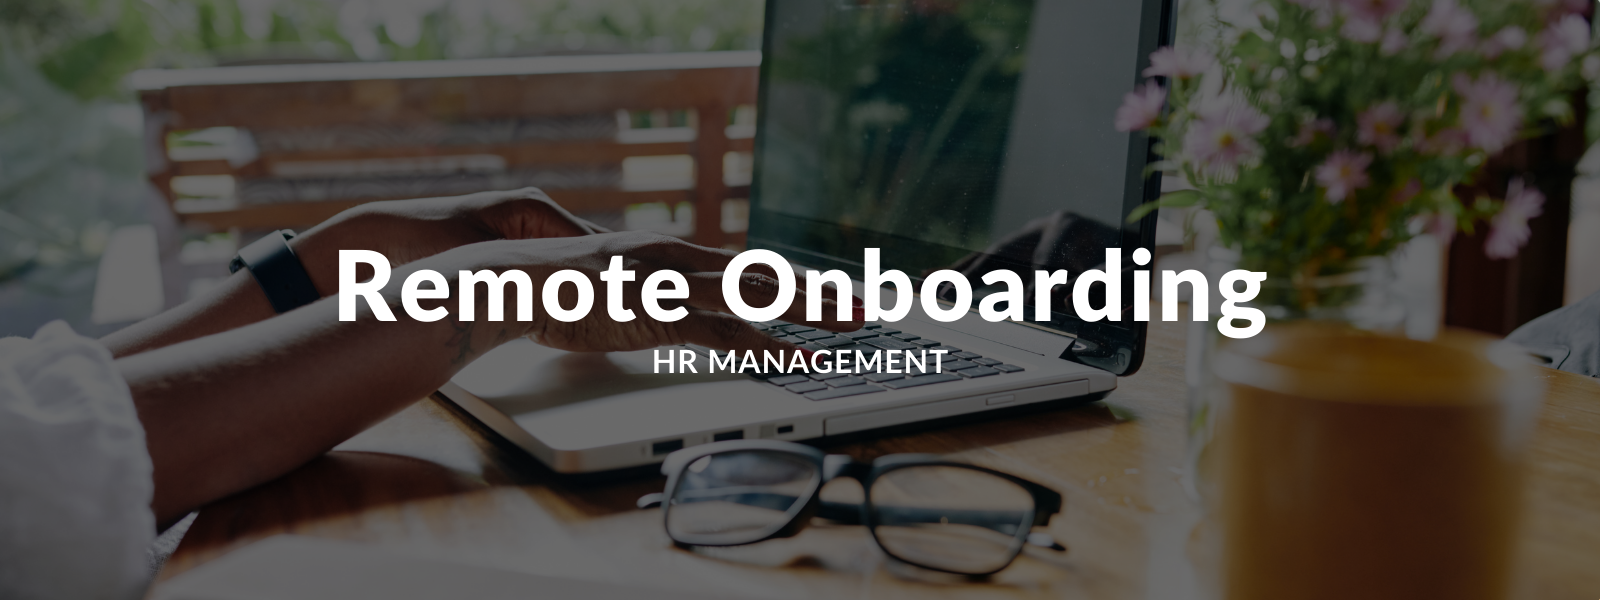 Onboarding in times of remote work - Talaera Blog